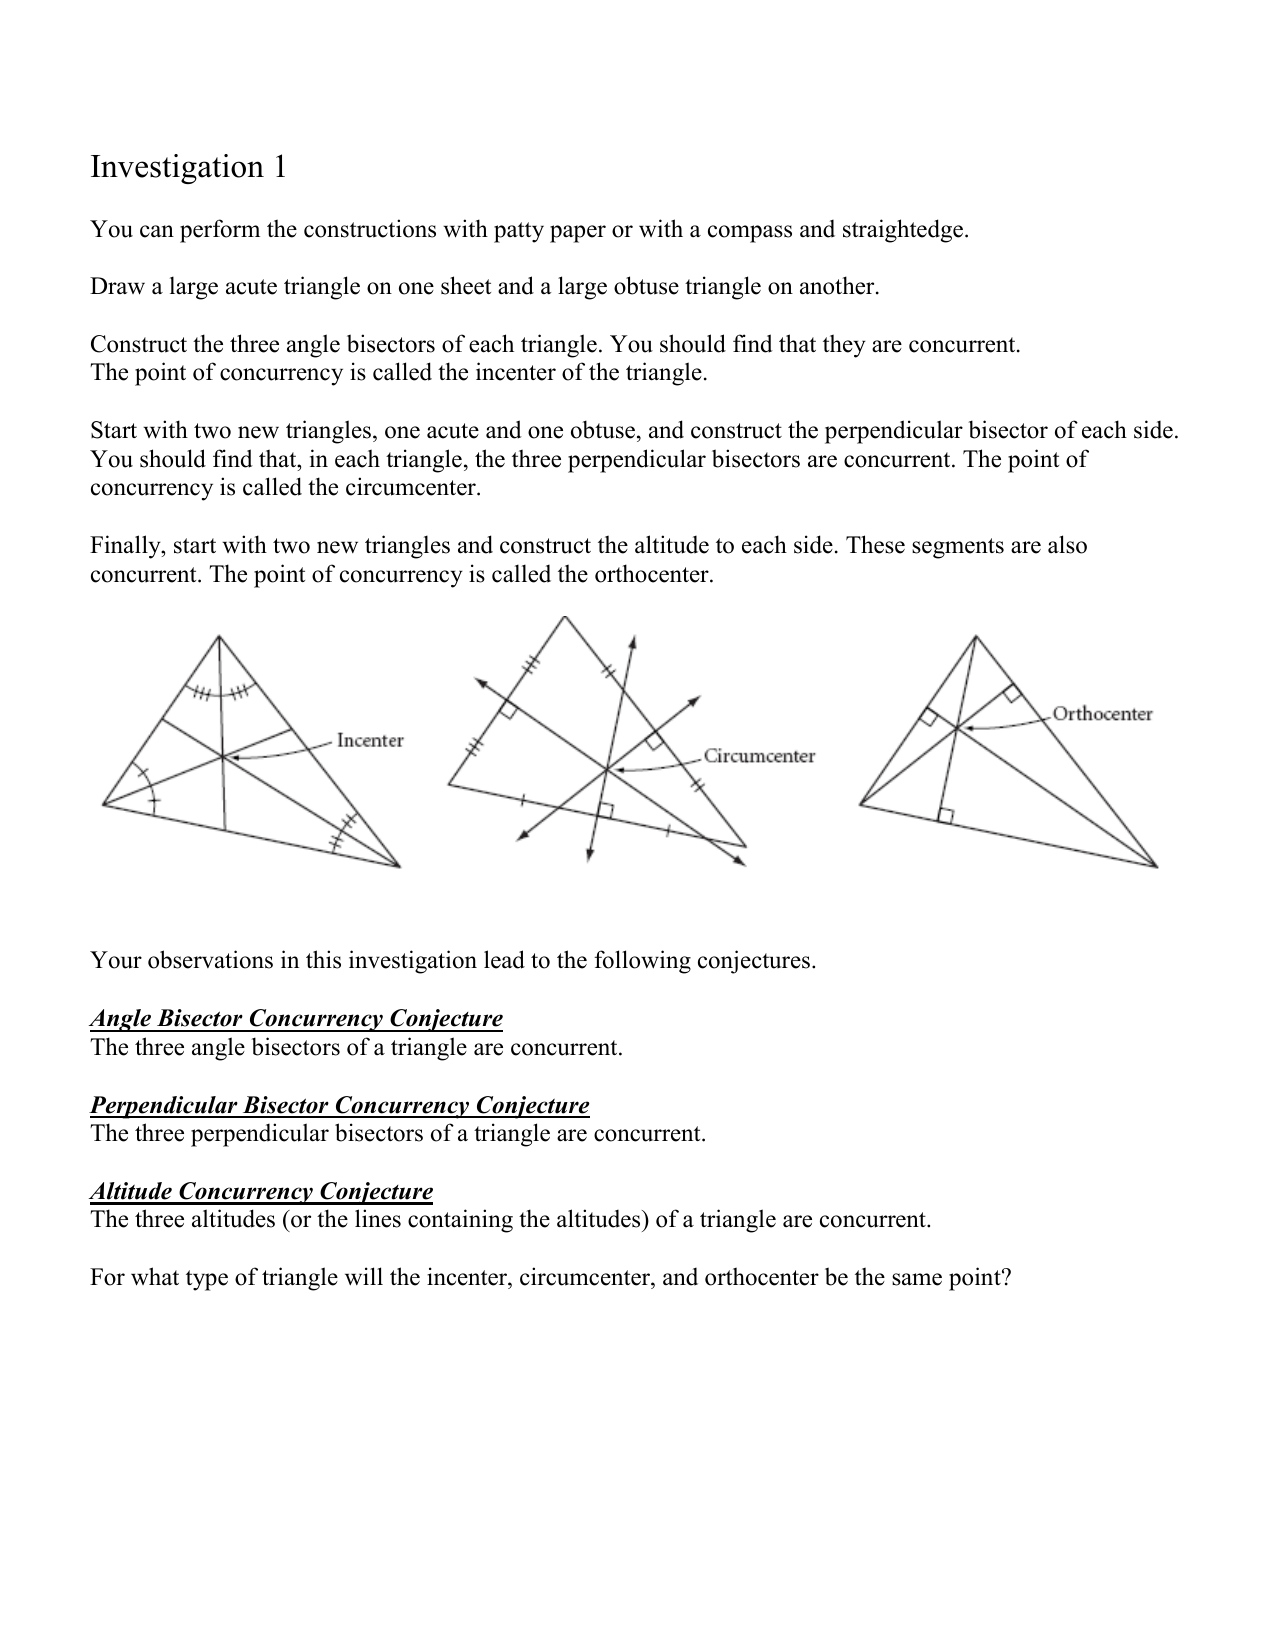 Points Of Concurrency Worksheet Answers